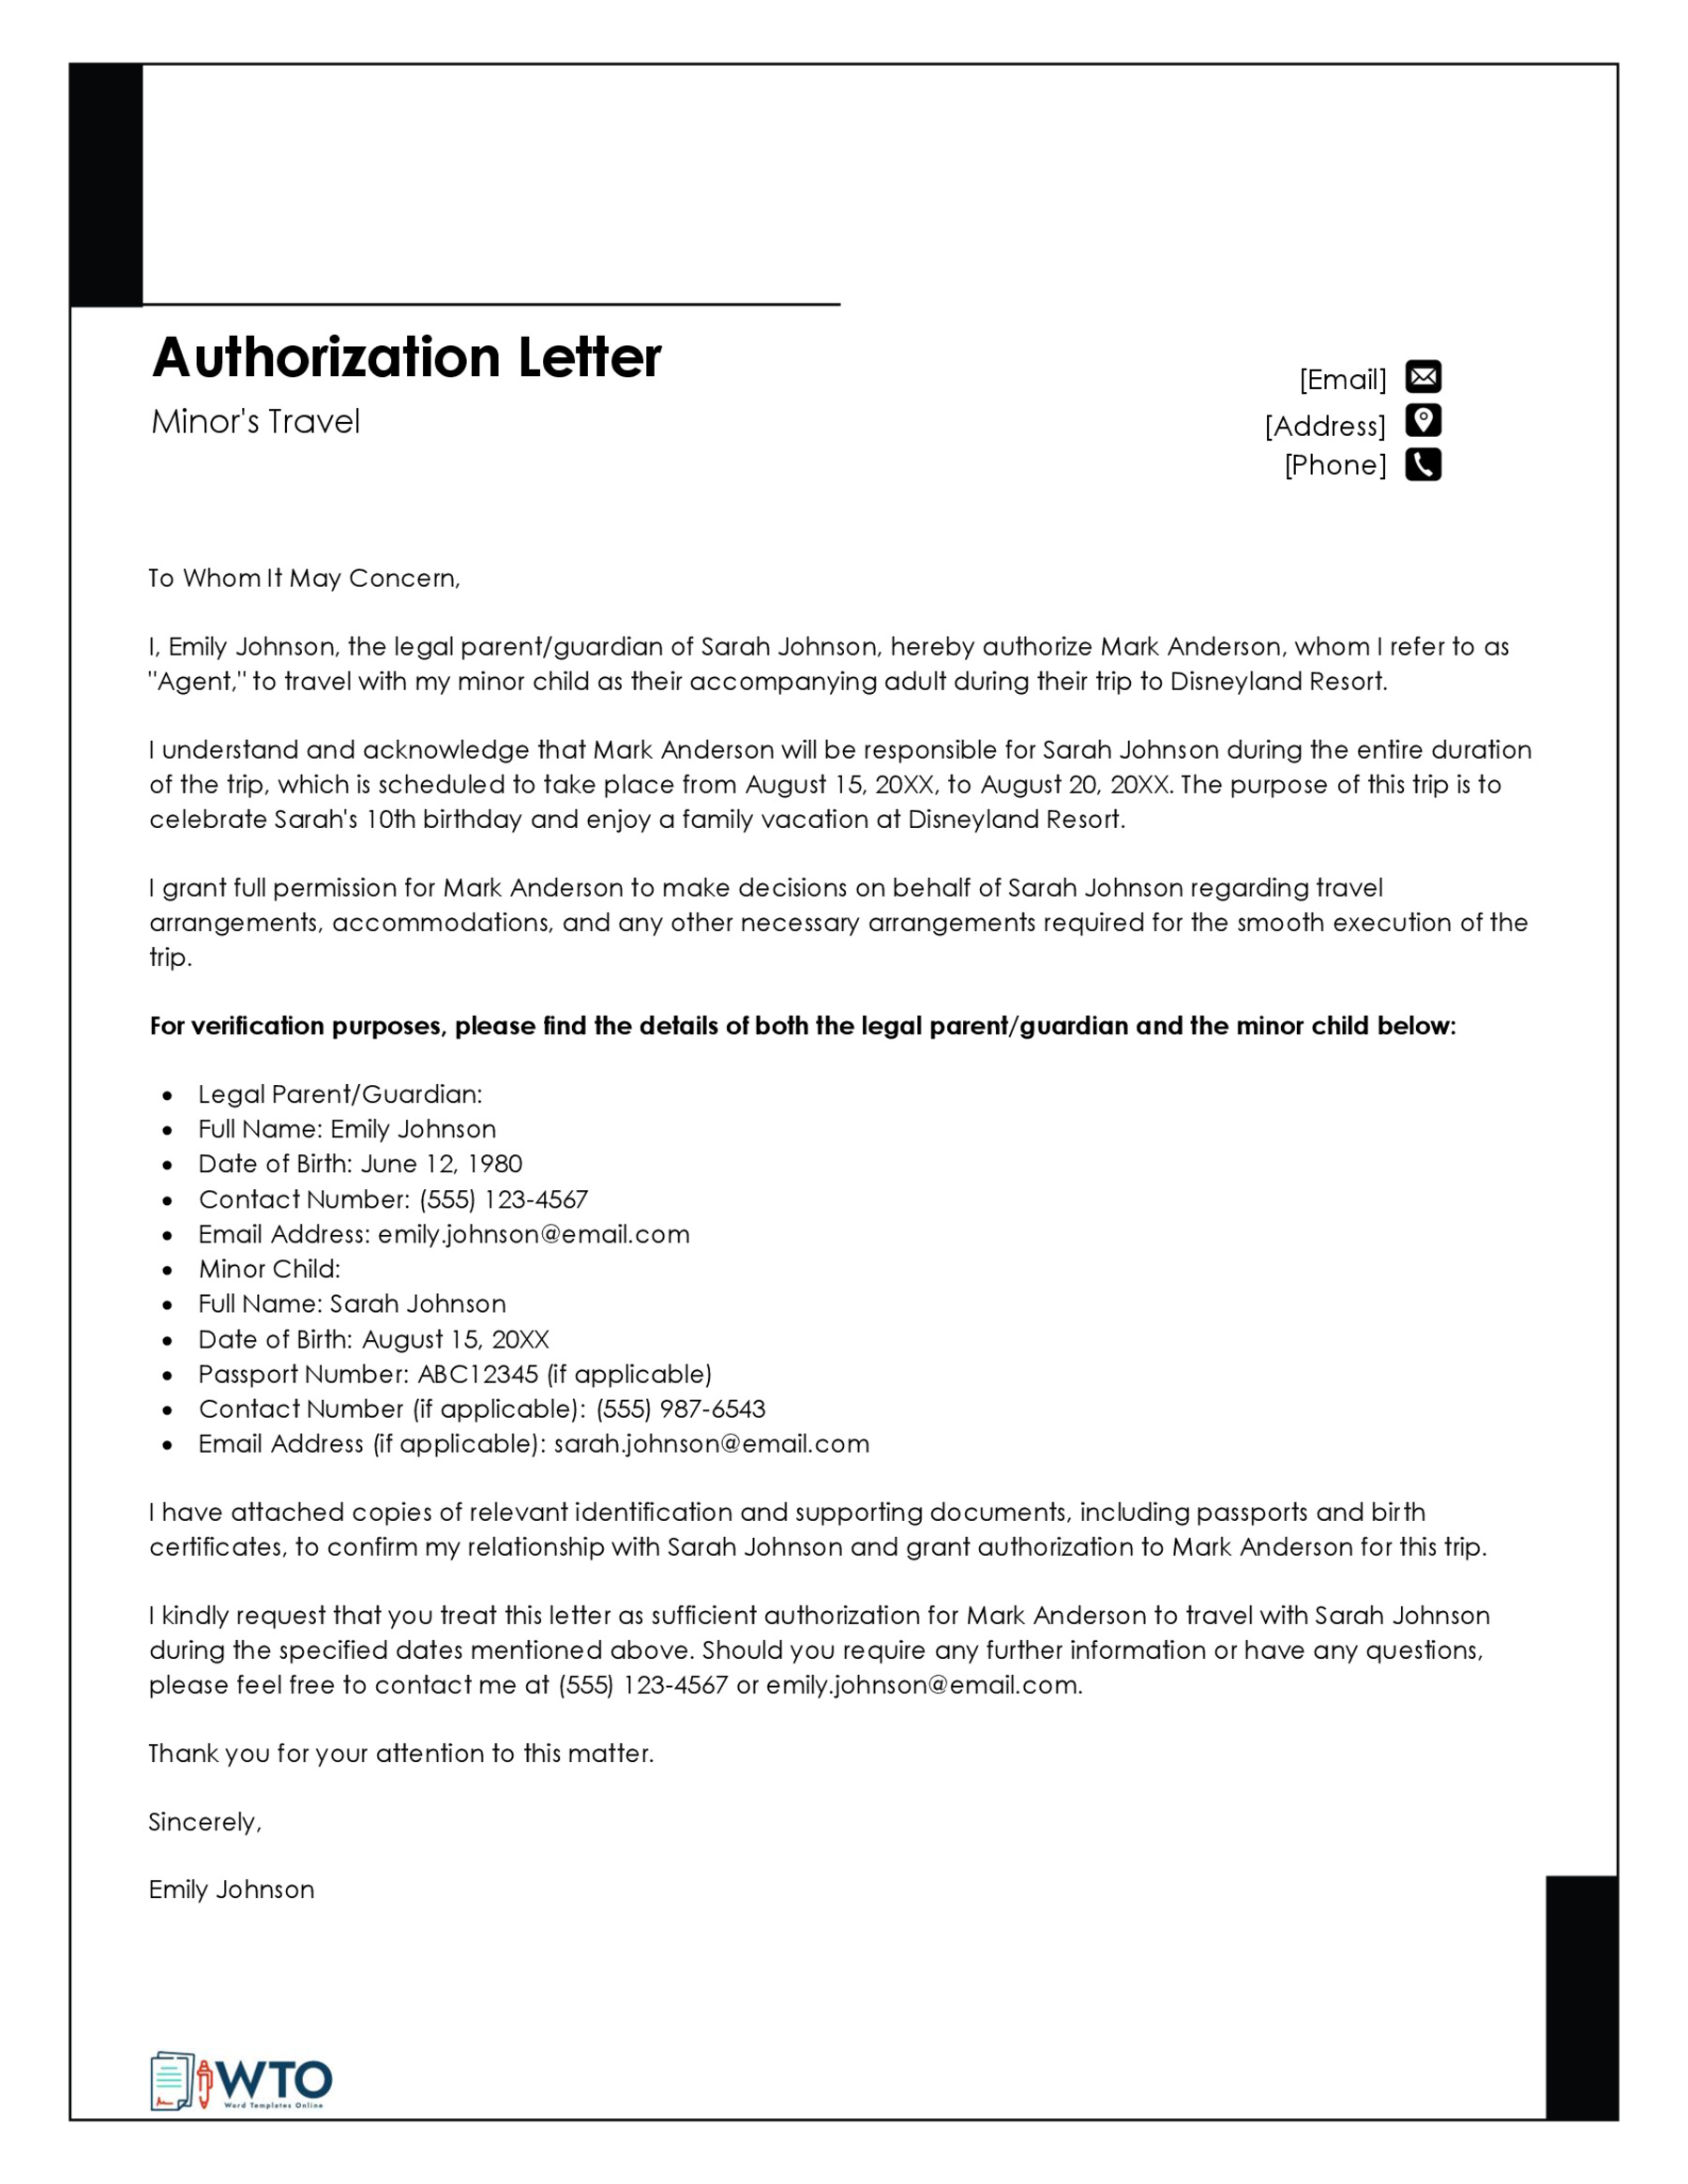 Sample of Authorization Letter toTravel with Minor-Free Downloadable